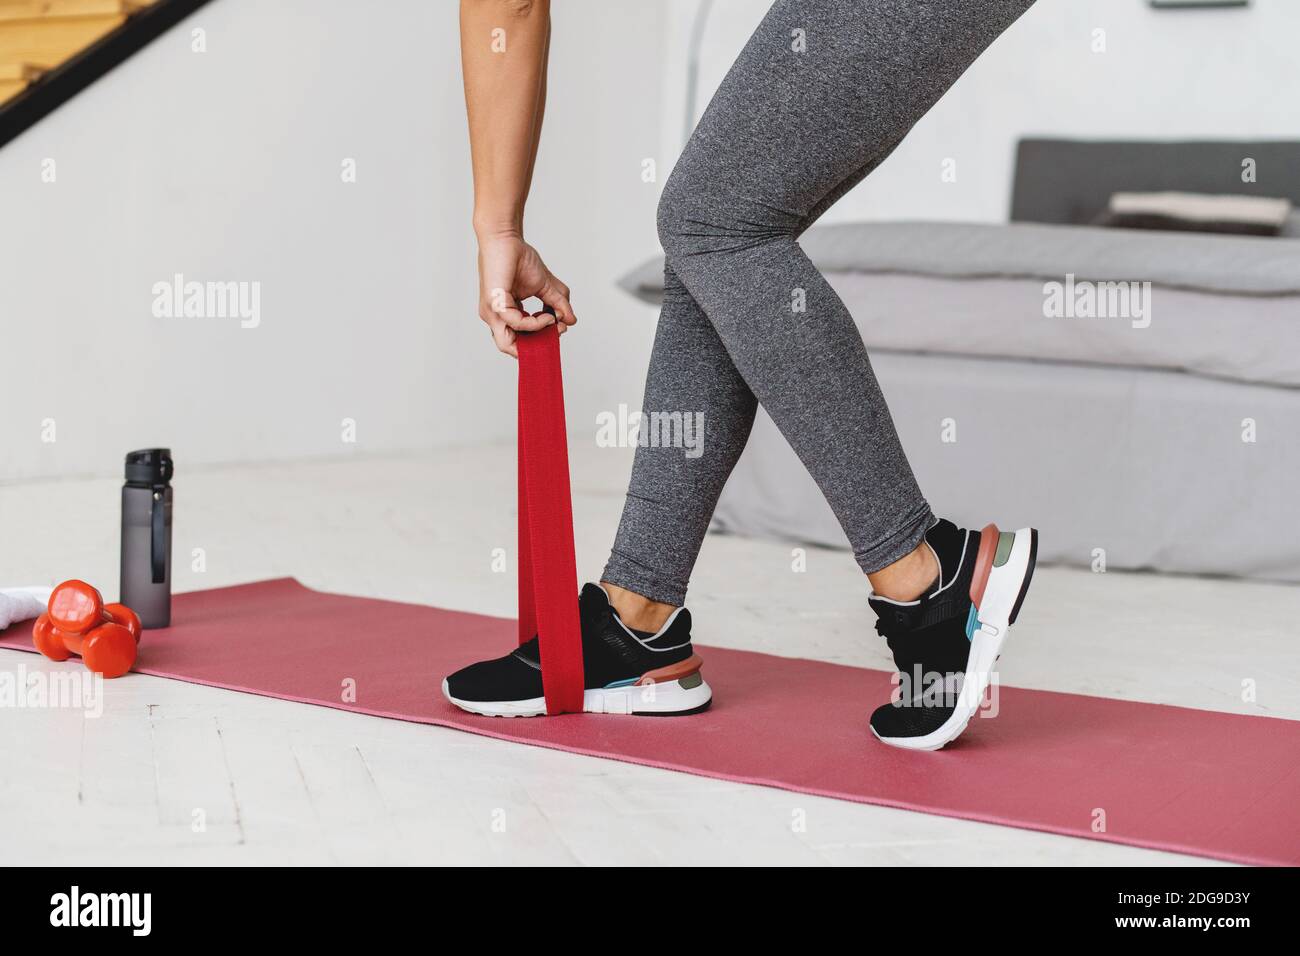 Cropped image of woman doing exercises with resistance bands at home. Stock Photo